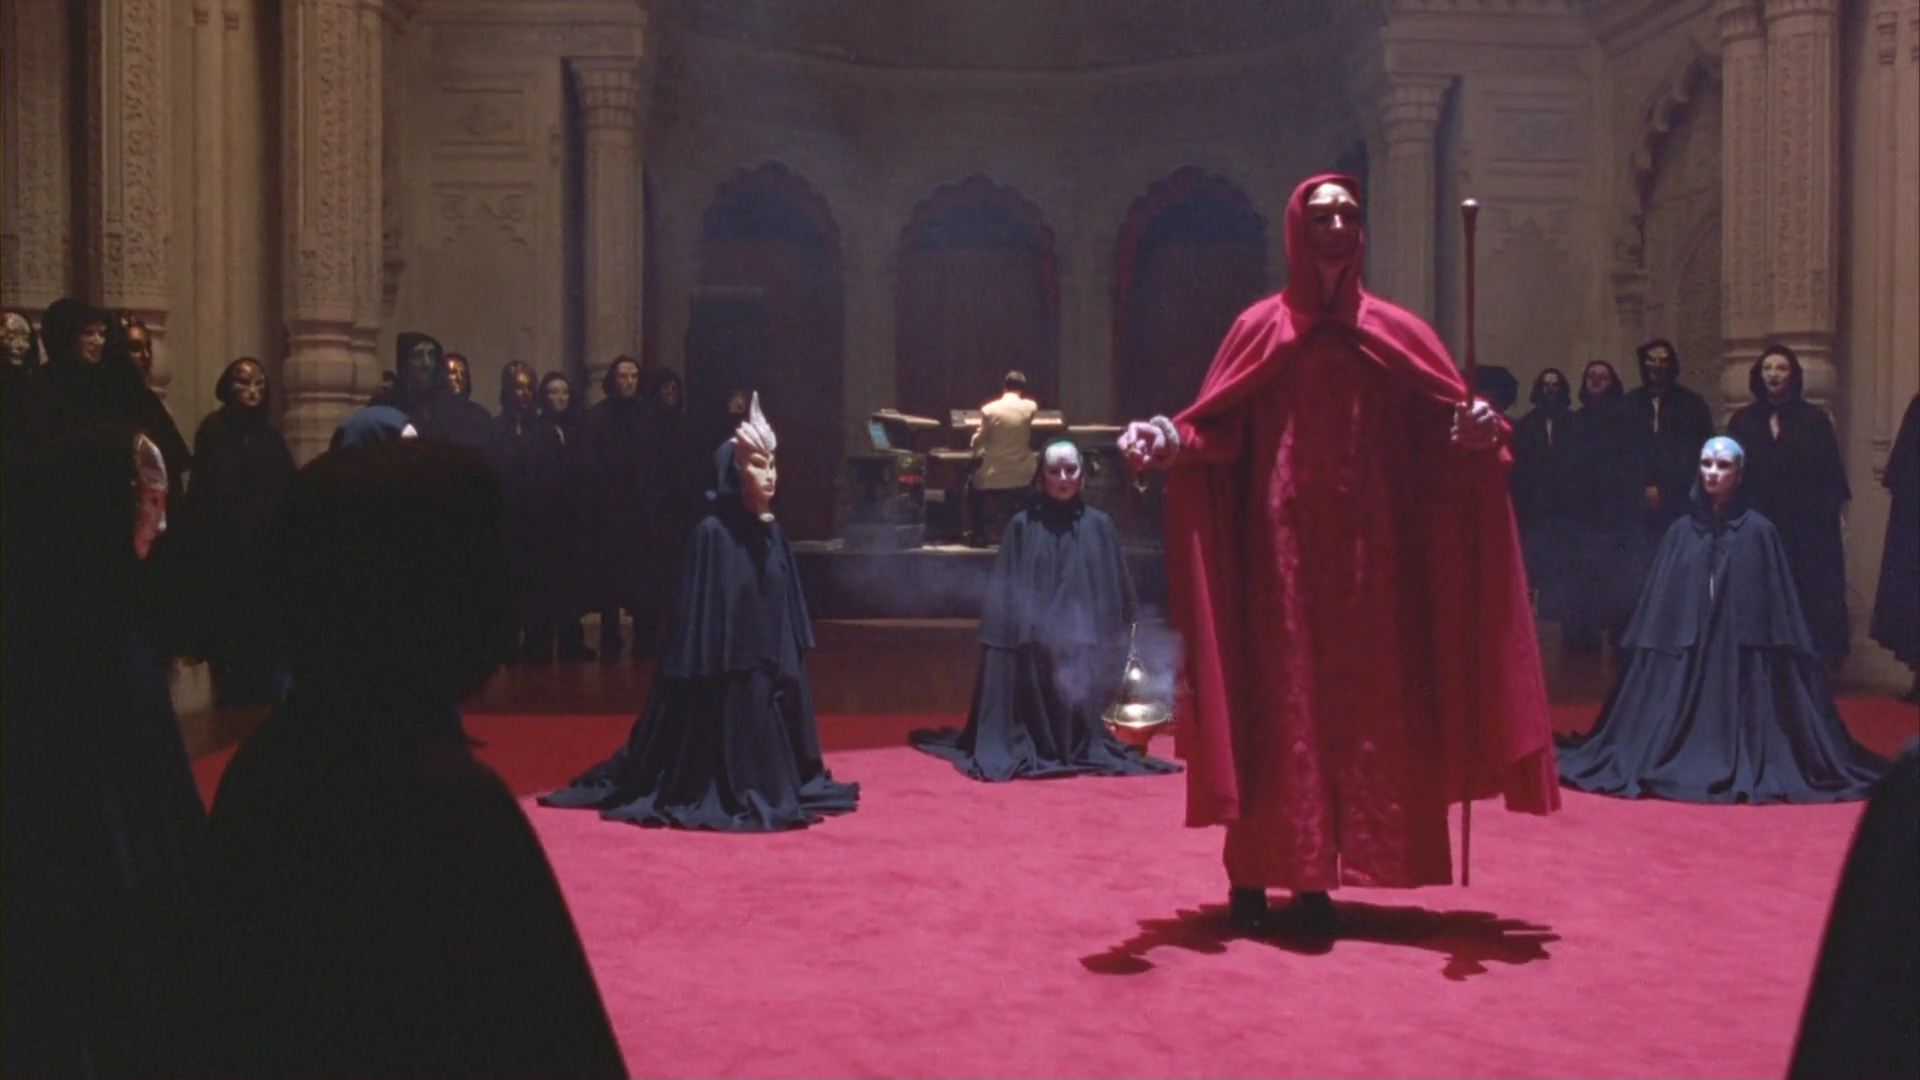 The ritualistic orgy sequence from Eyes Wide Shut (1999)